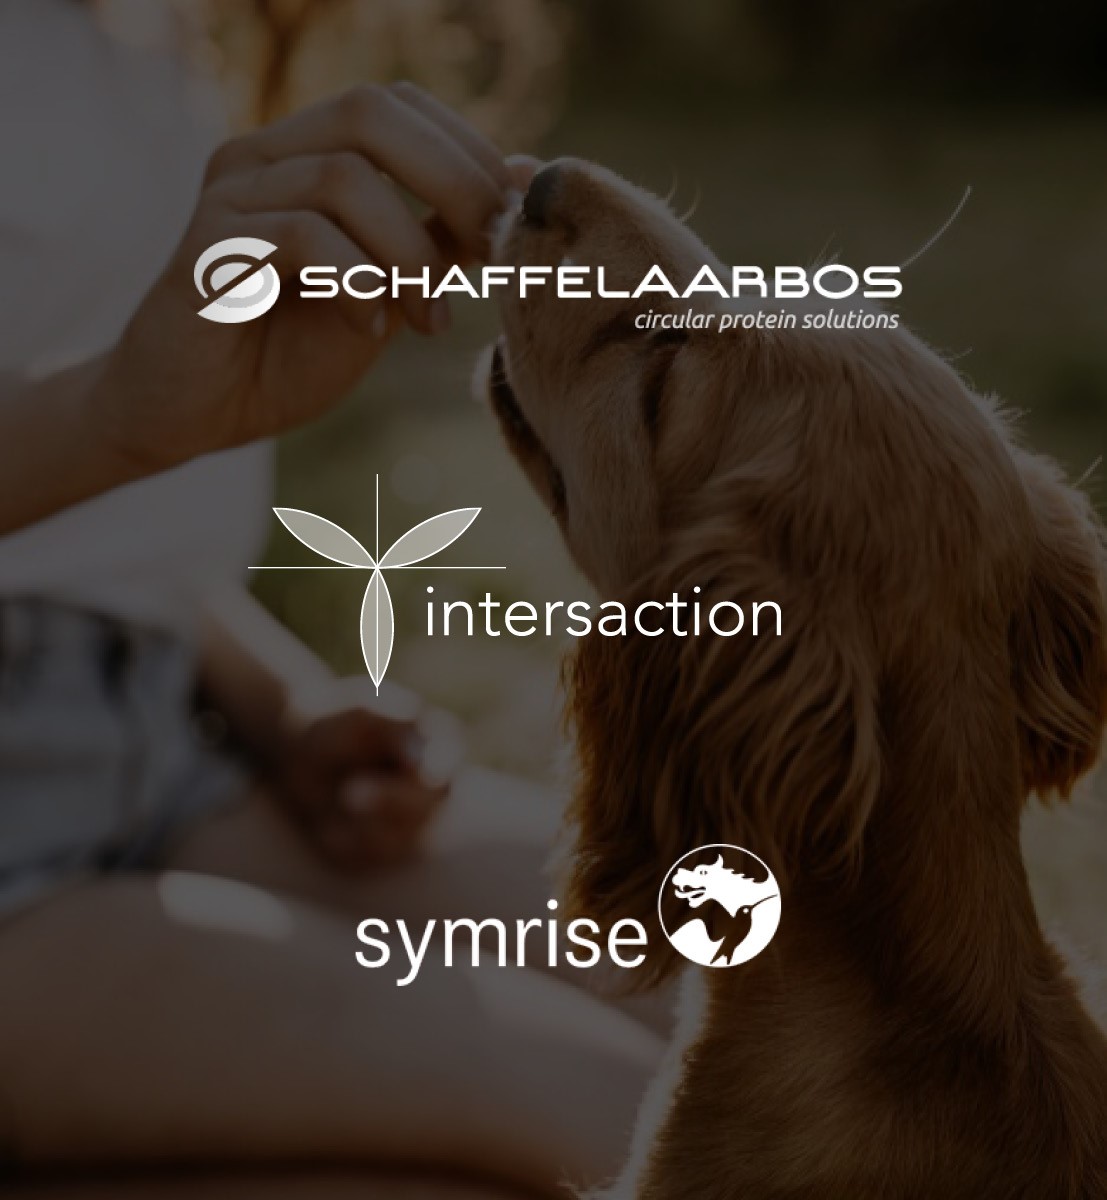 DEX international M&A advised Intersaction and management on the sale of Schaffelaarbos B.V. to Symrise AG.